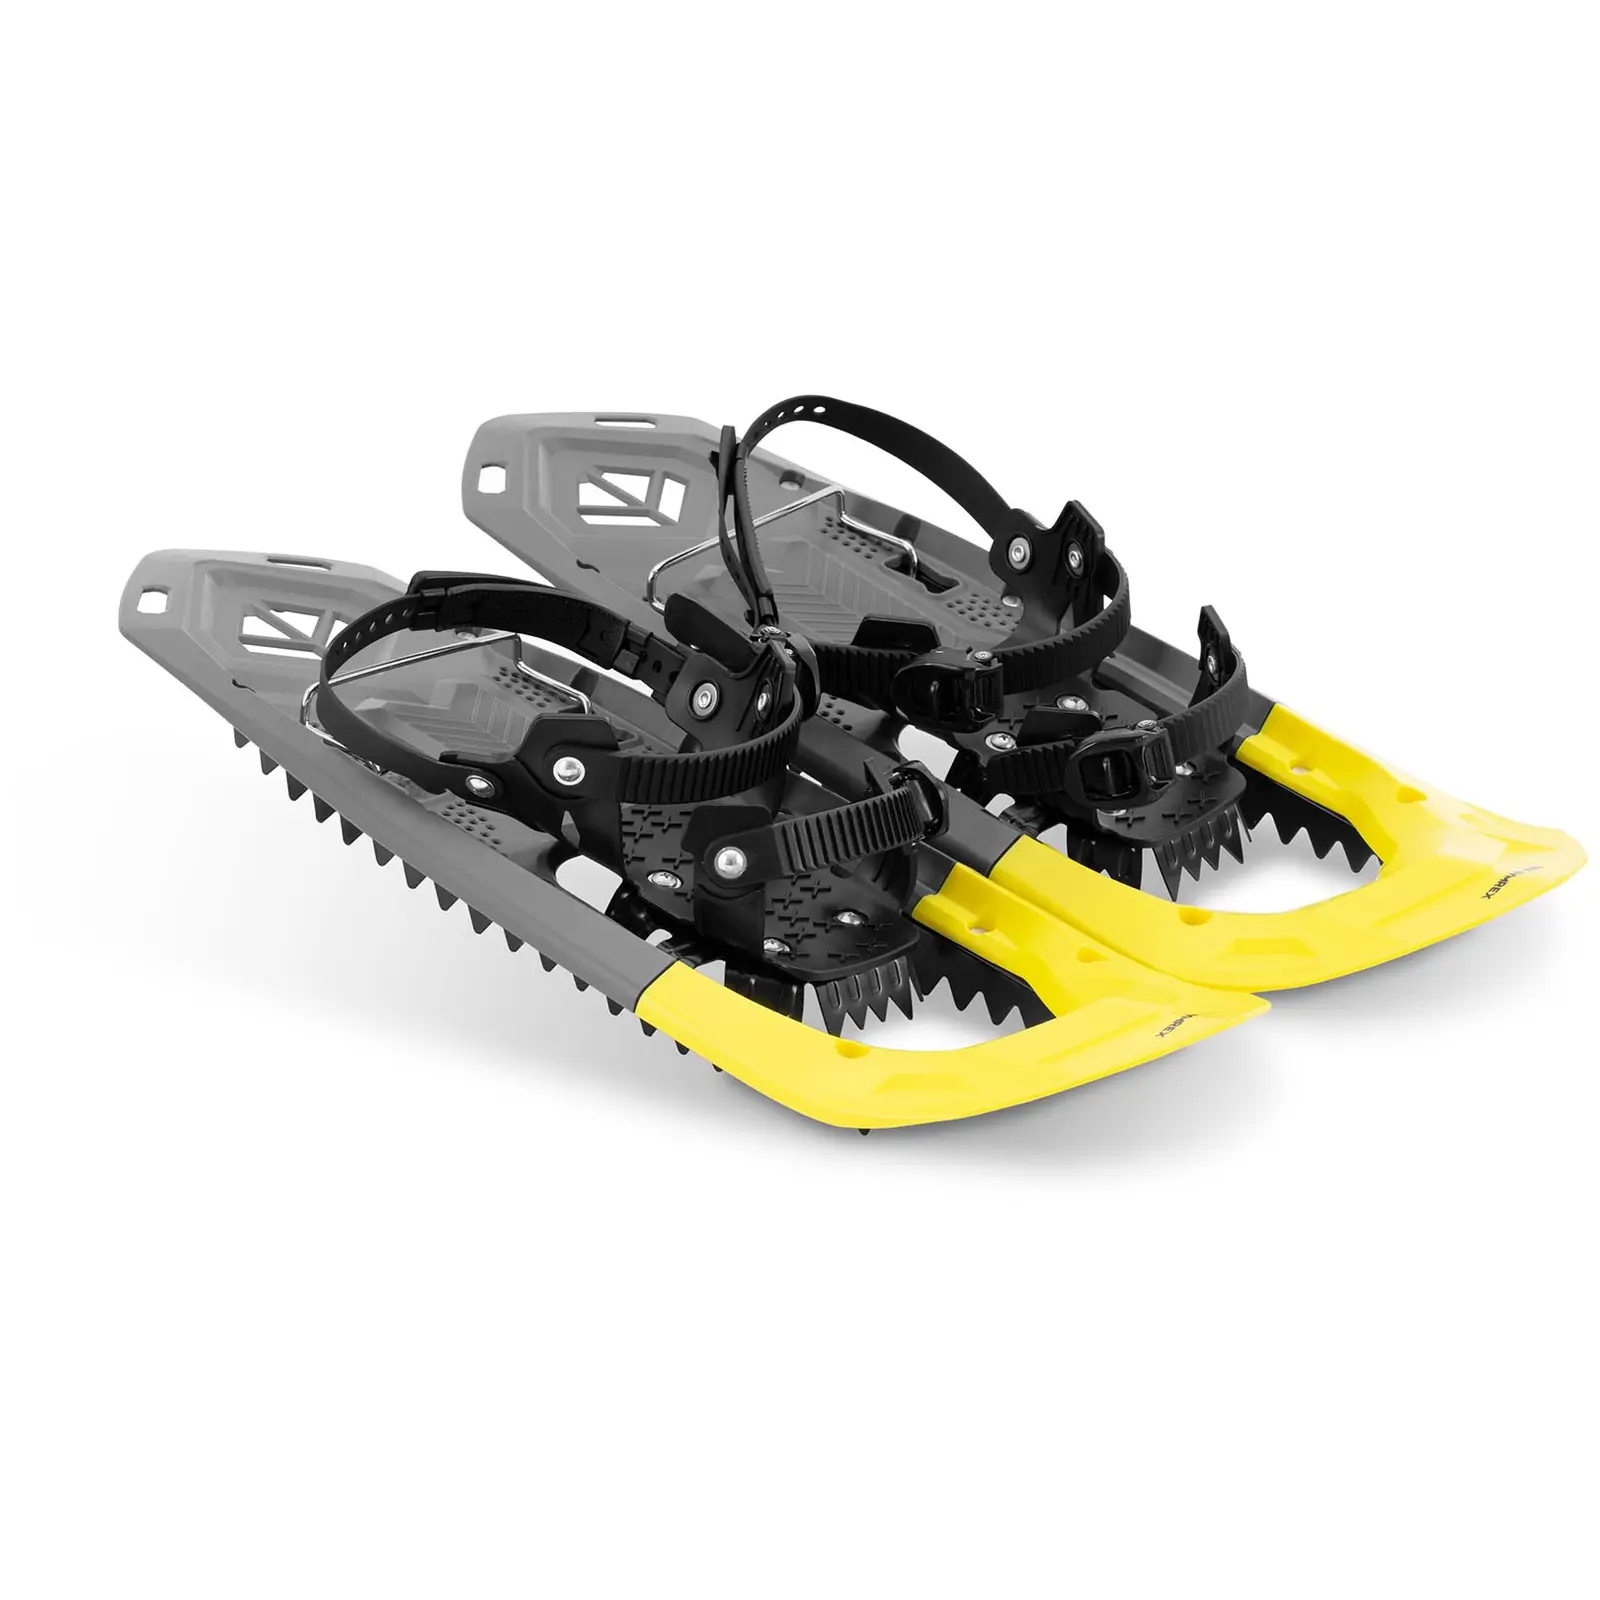 Snow shoes - up to 90 kg - foot lengths: 27 - 37 cm - aluminium / steel / HDPE